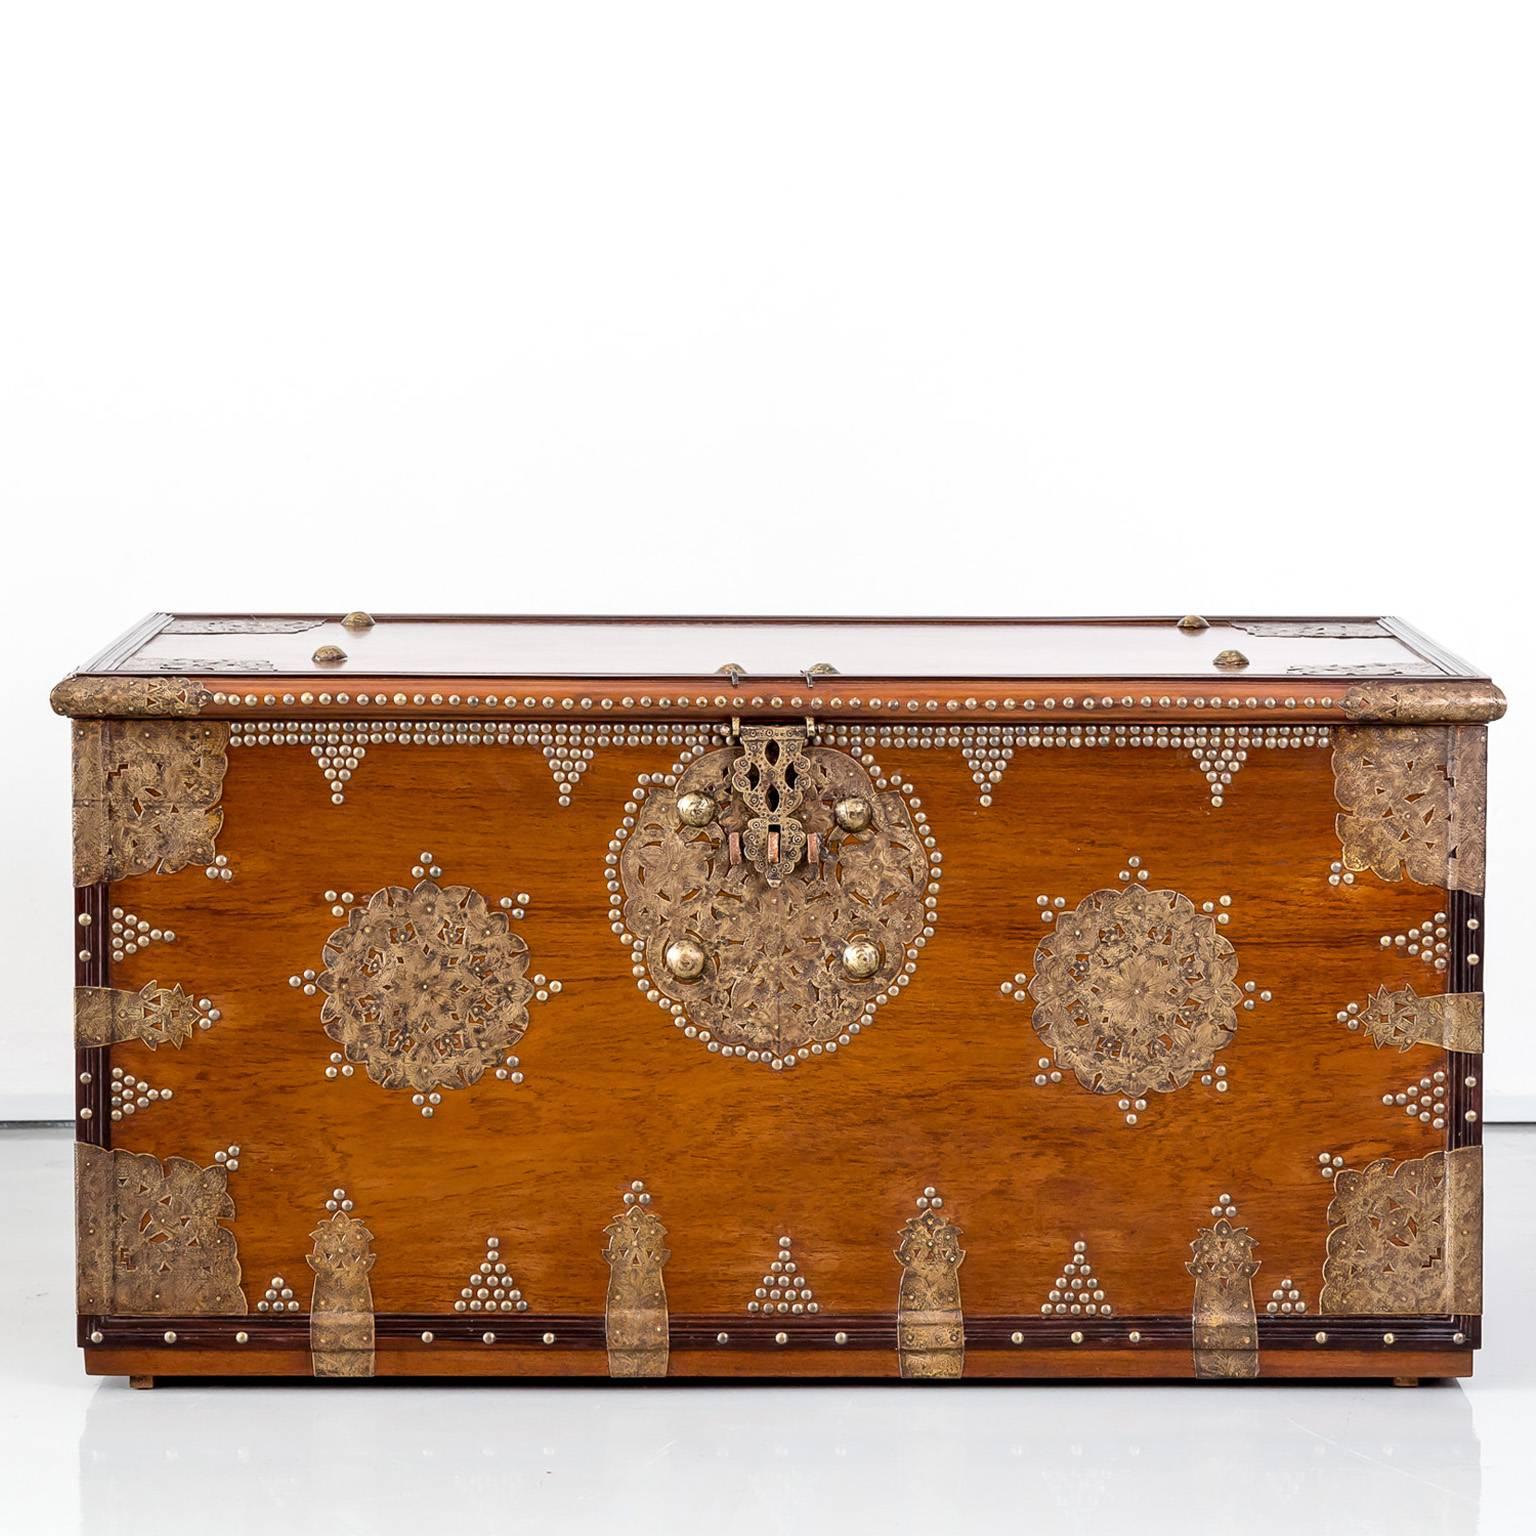 A rare and well preserved chest of solid plank construction in teak wood, beautifully decorated with brass. 
The term “Arab chest” more correctly denotes ownership rather than provenance. In reality, early chests were trade items collected by Arabs